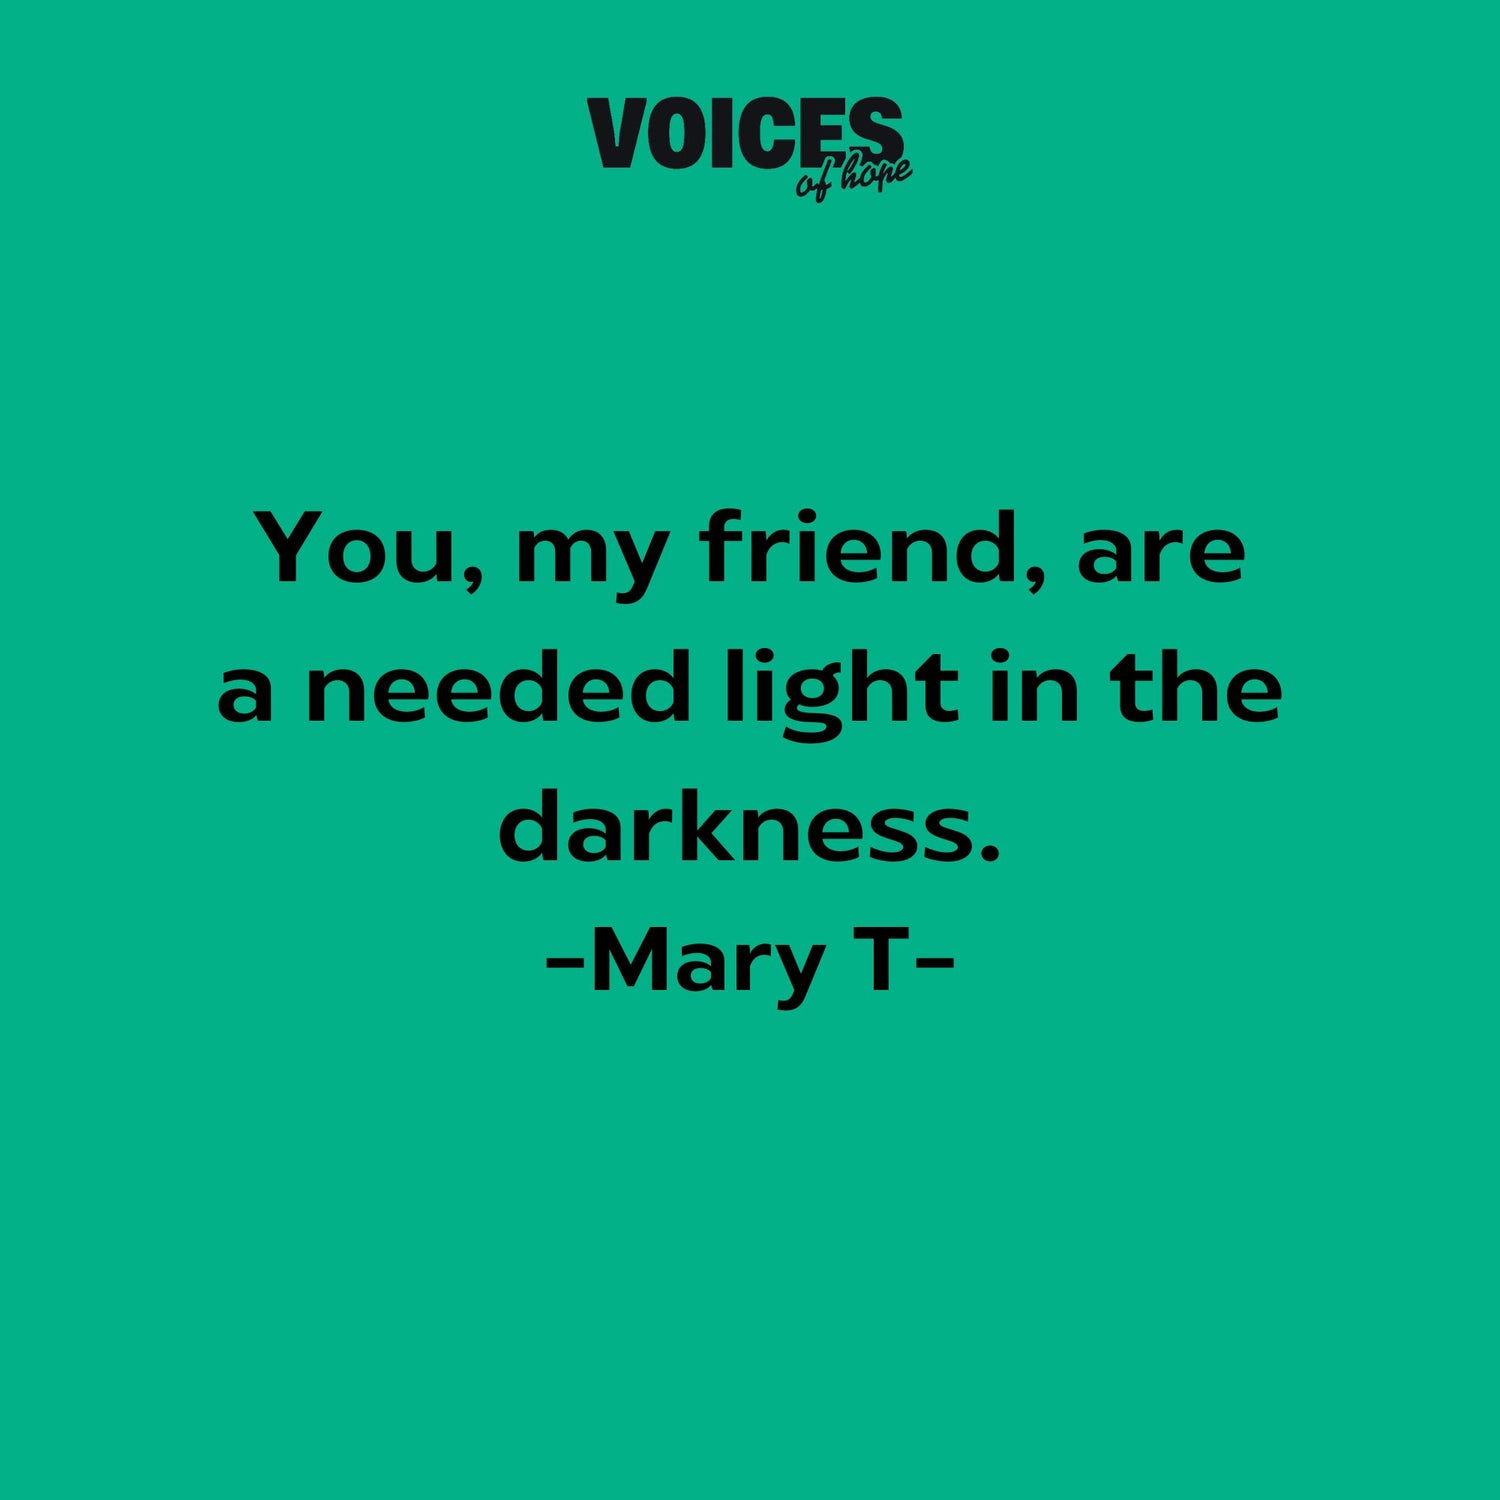 Green background with black writing that reads: "you, my friend, are a needed light in the darkness. Mary T."